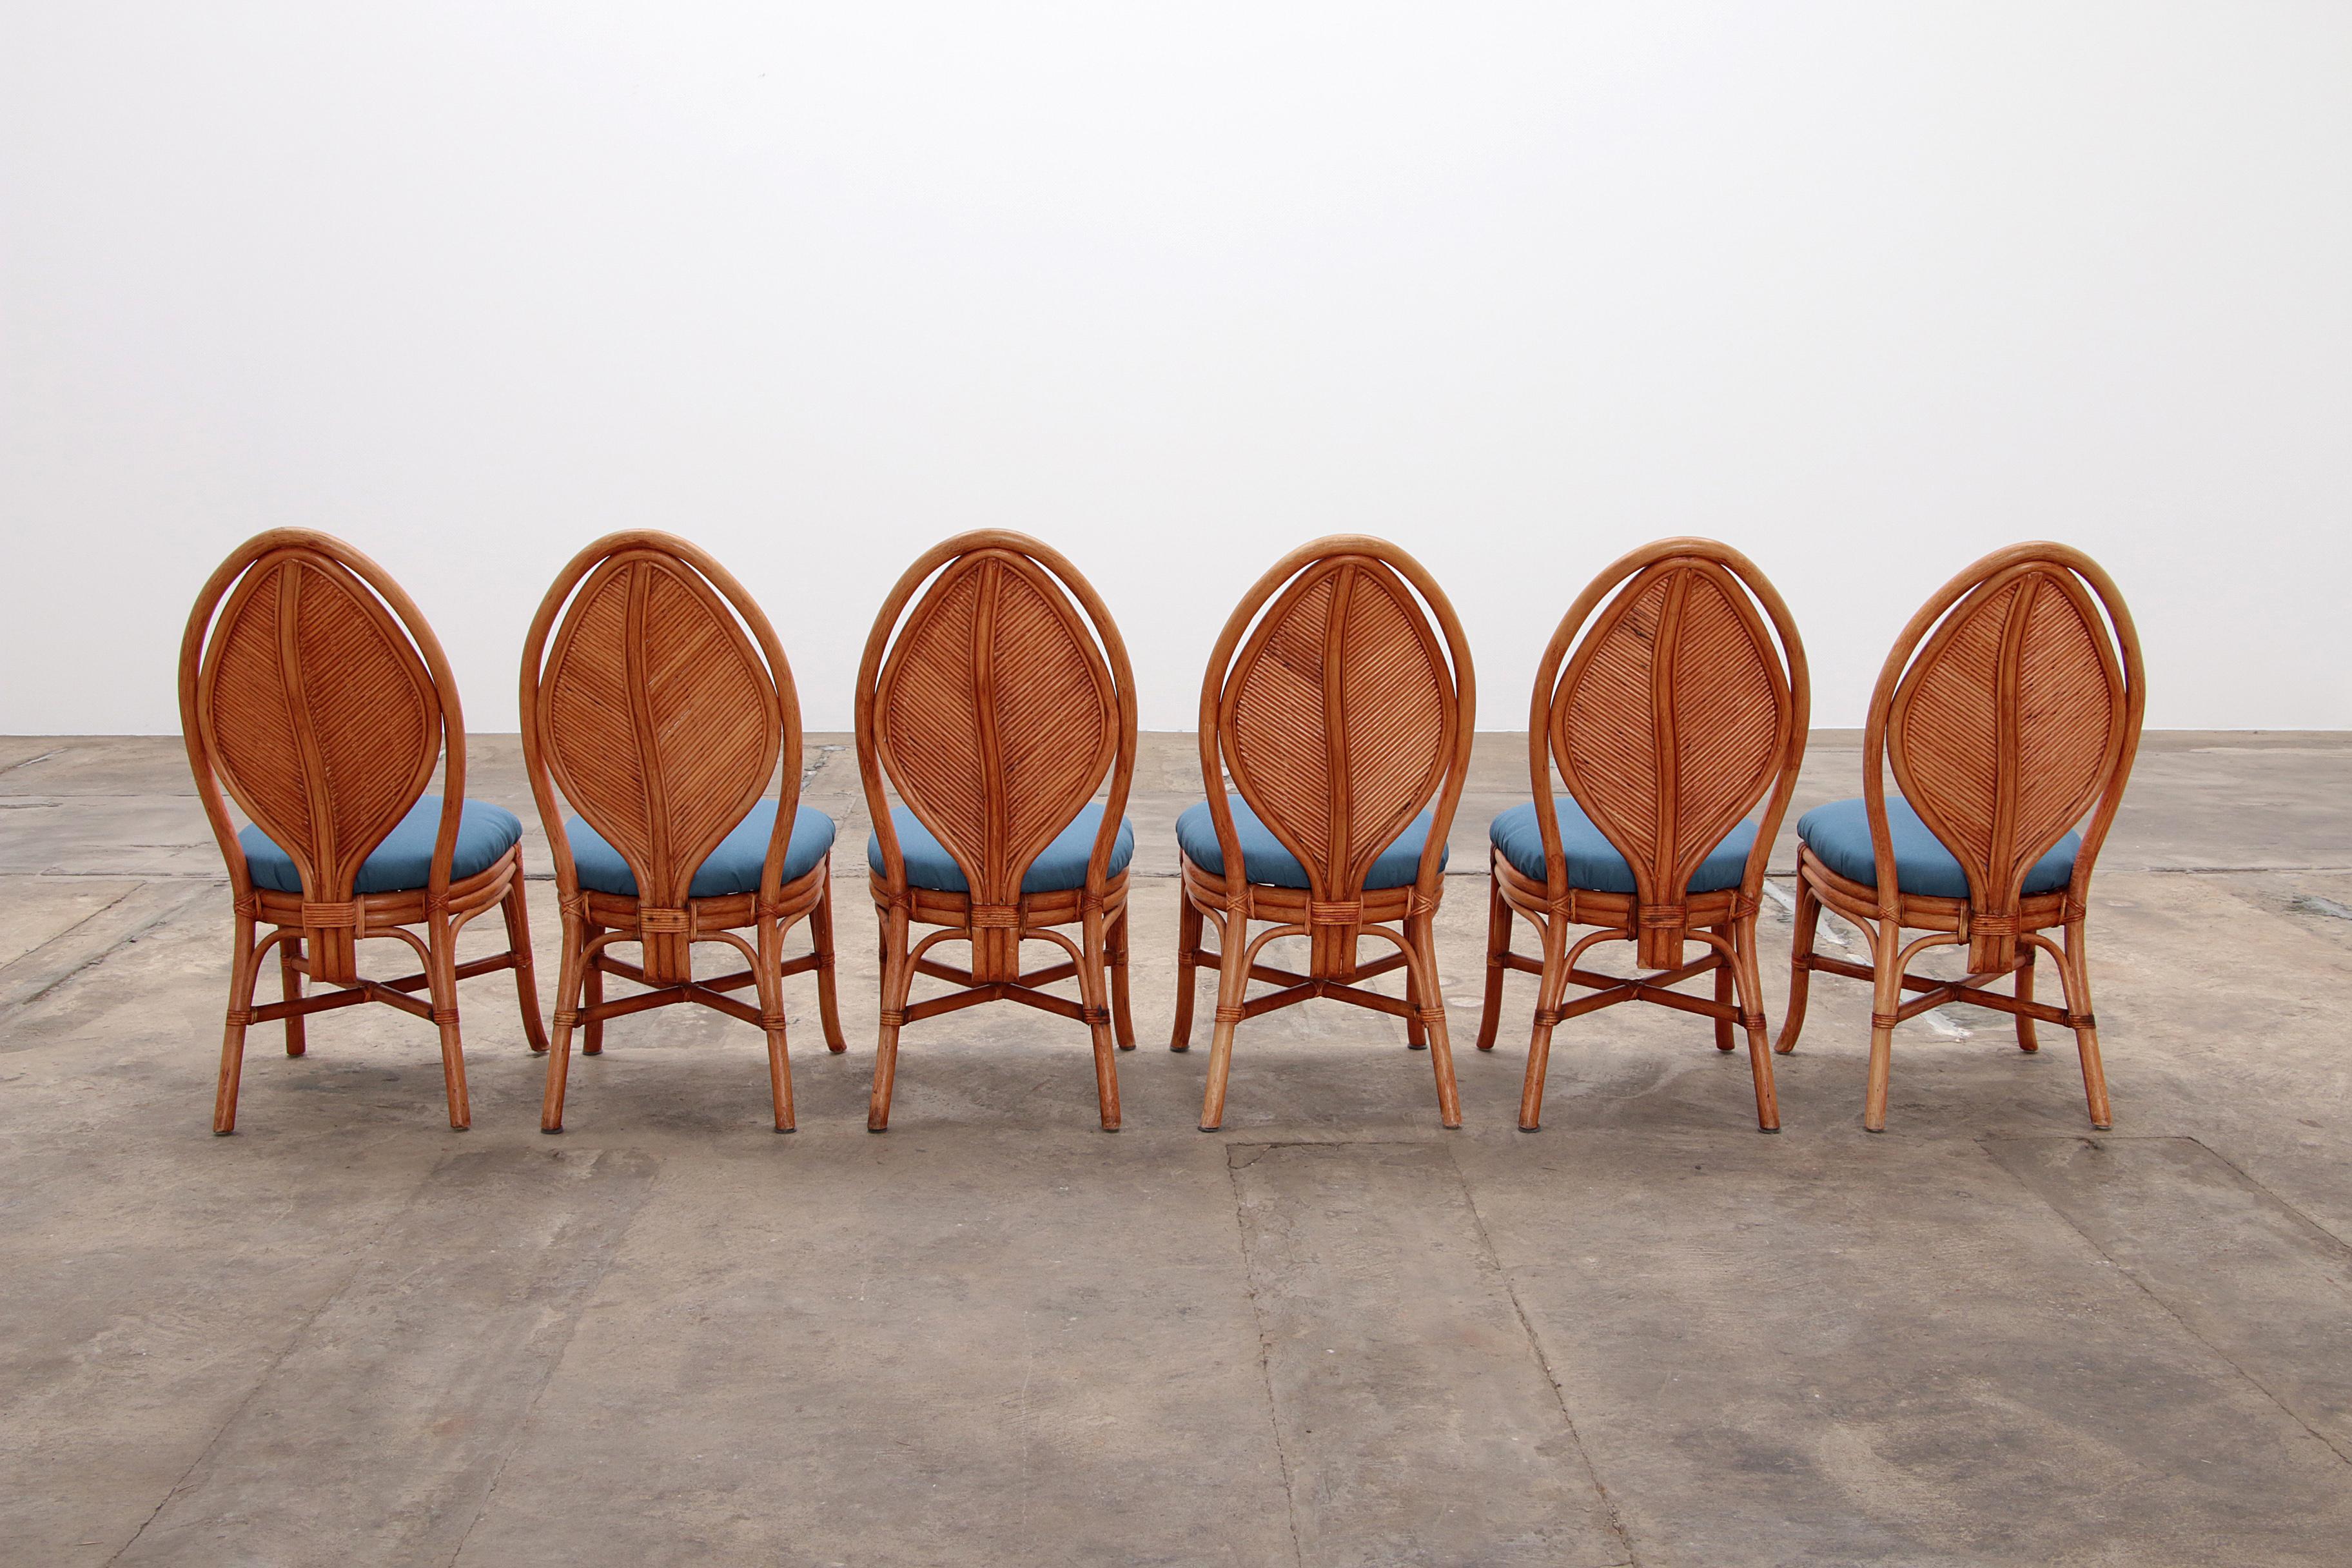 Bohemian Bamboo Mcguire dining table set with 6 palm leaf chairs, 1960 France. For Sale 5